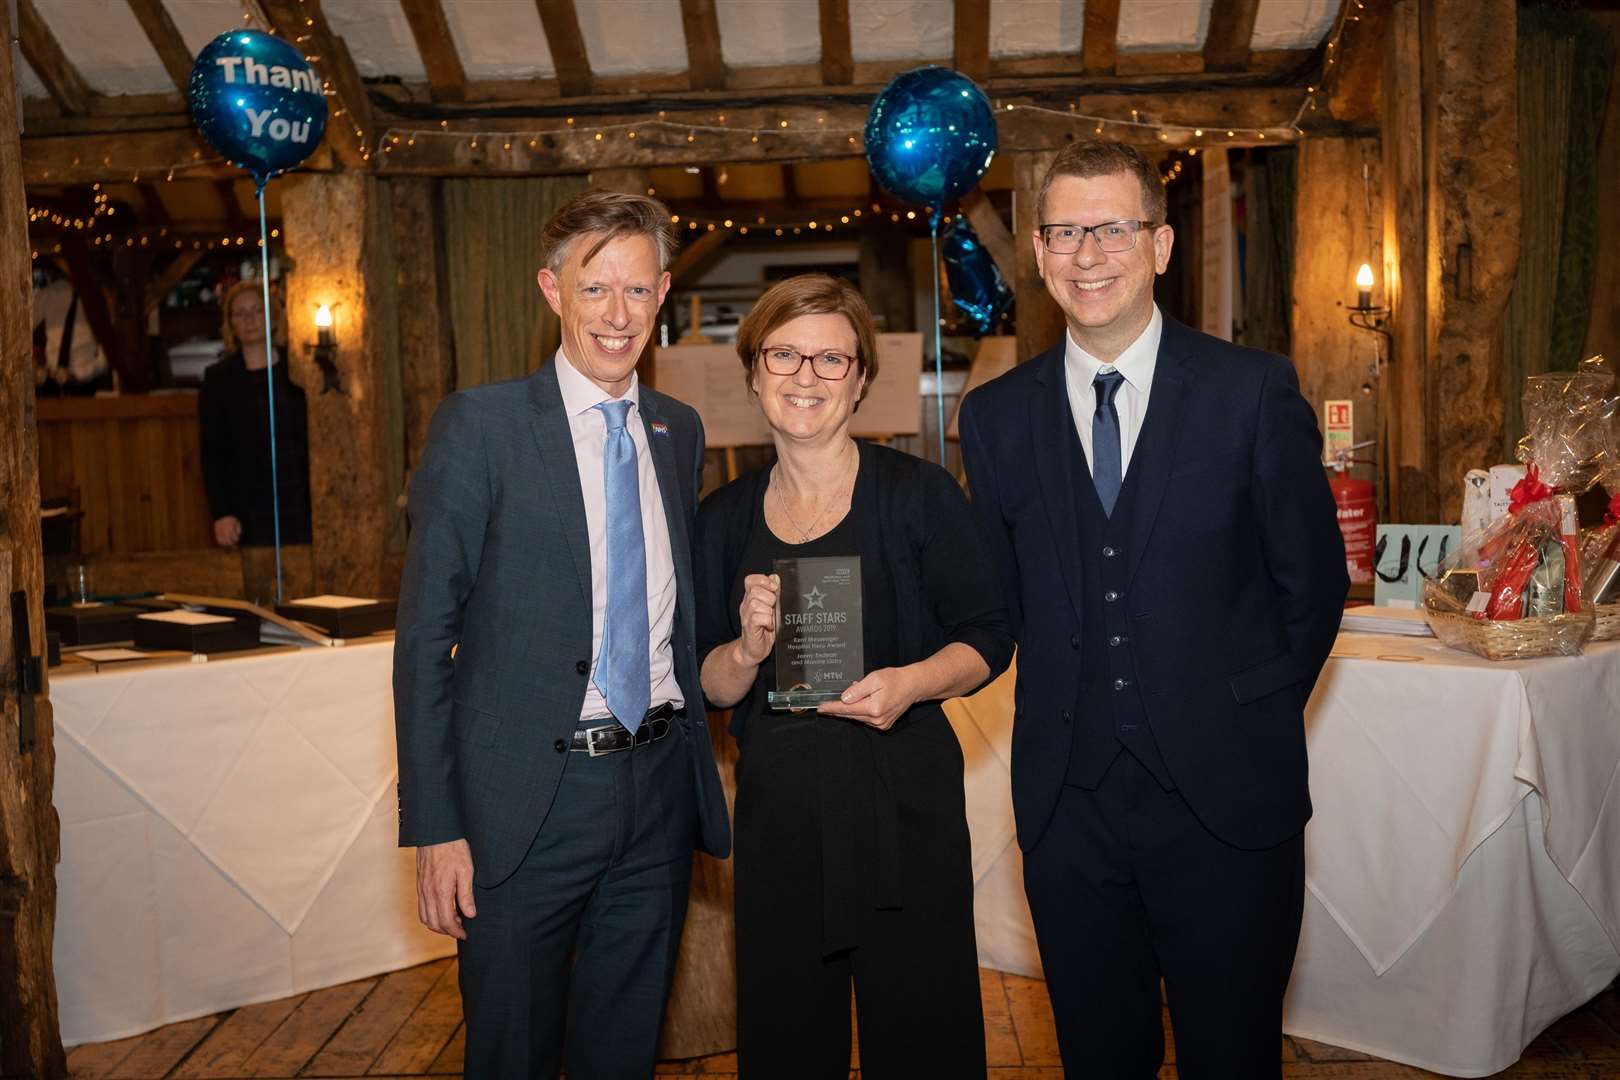 Maxine Libby, accepted the Maidstone Hospital Hero award for herself and on behalf of Jenny Endean. Pictured with CEO Miles Scott, left, and Paul Kerensa, comedian, right, who helped host the event